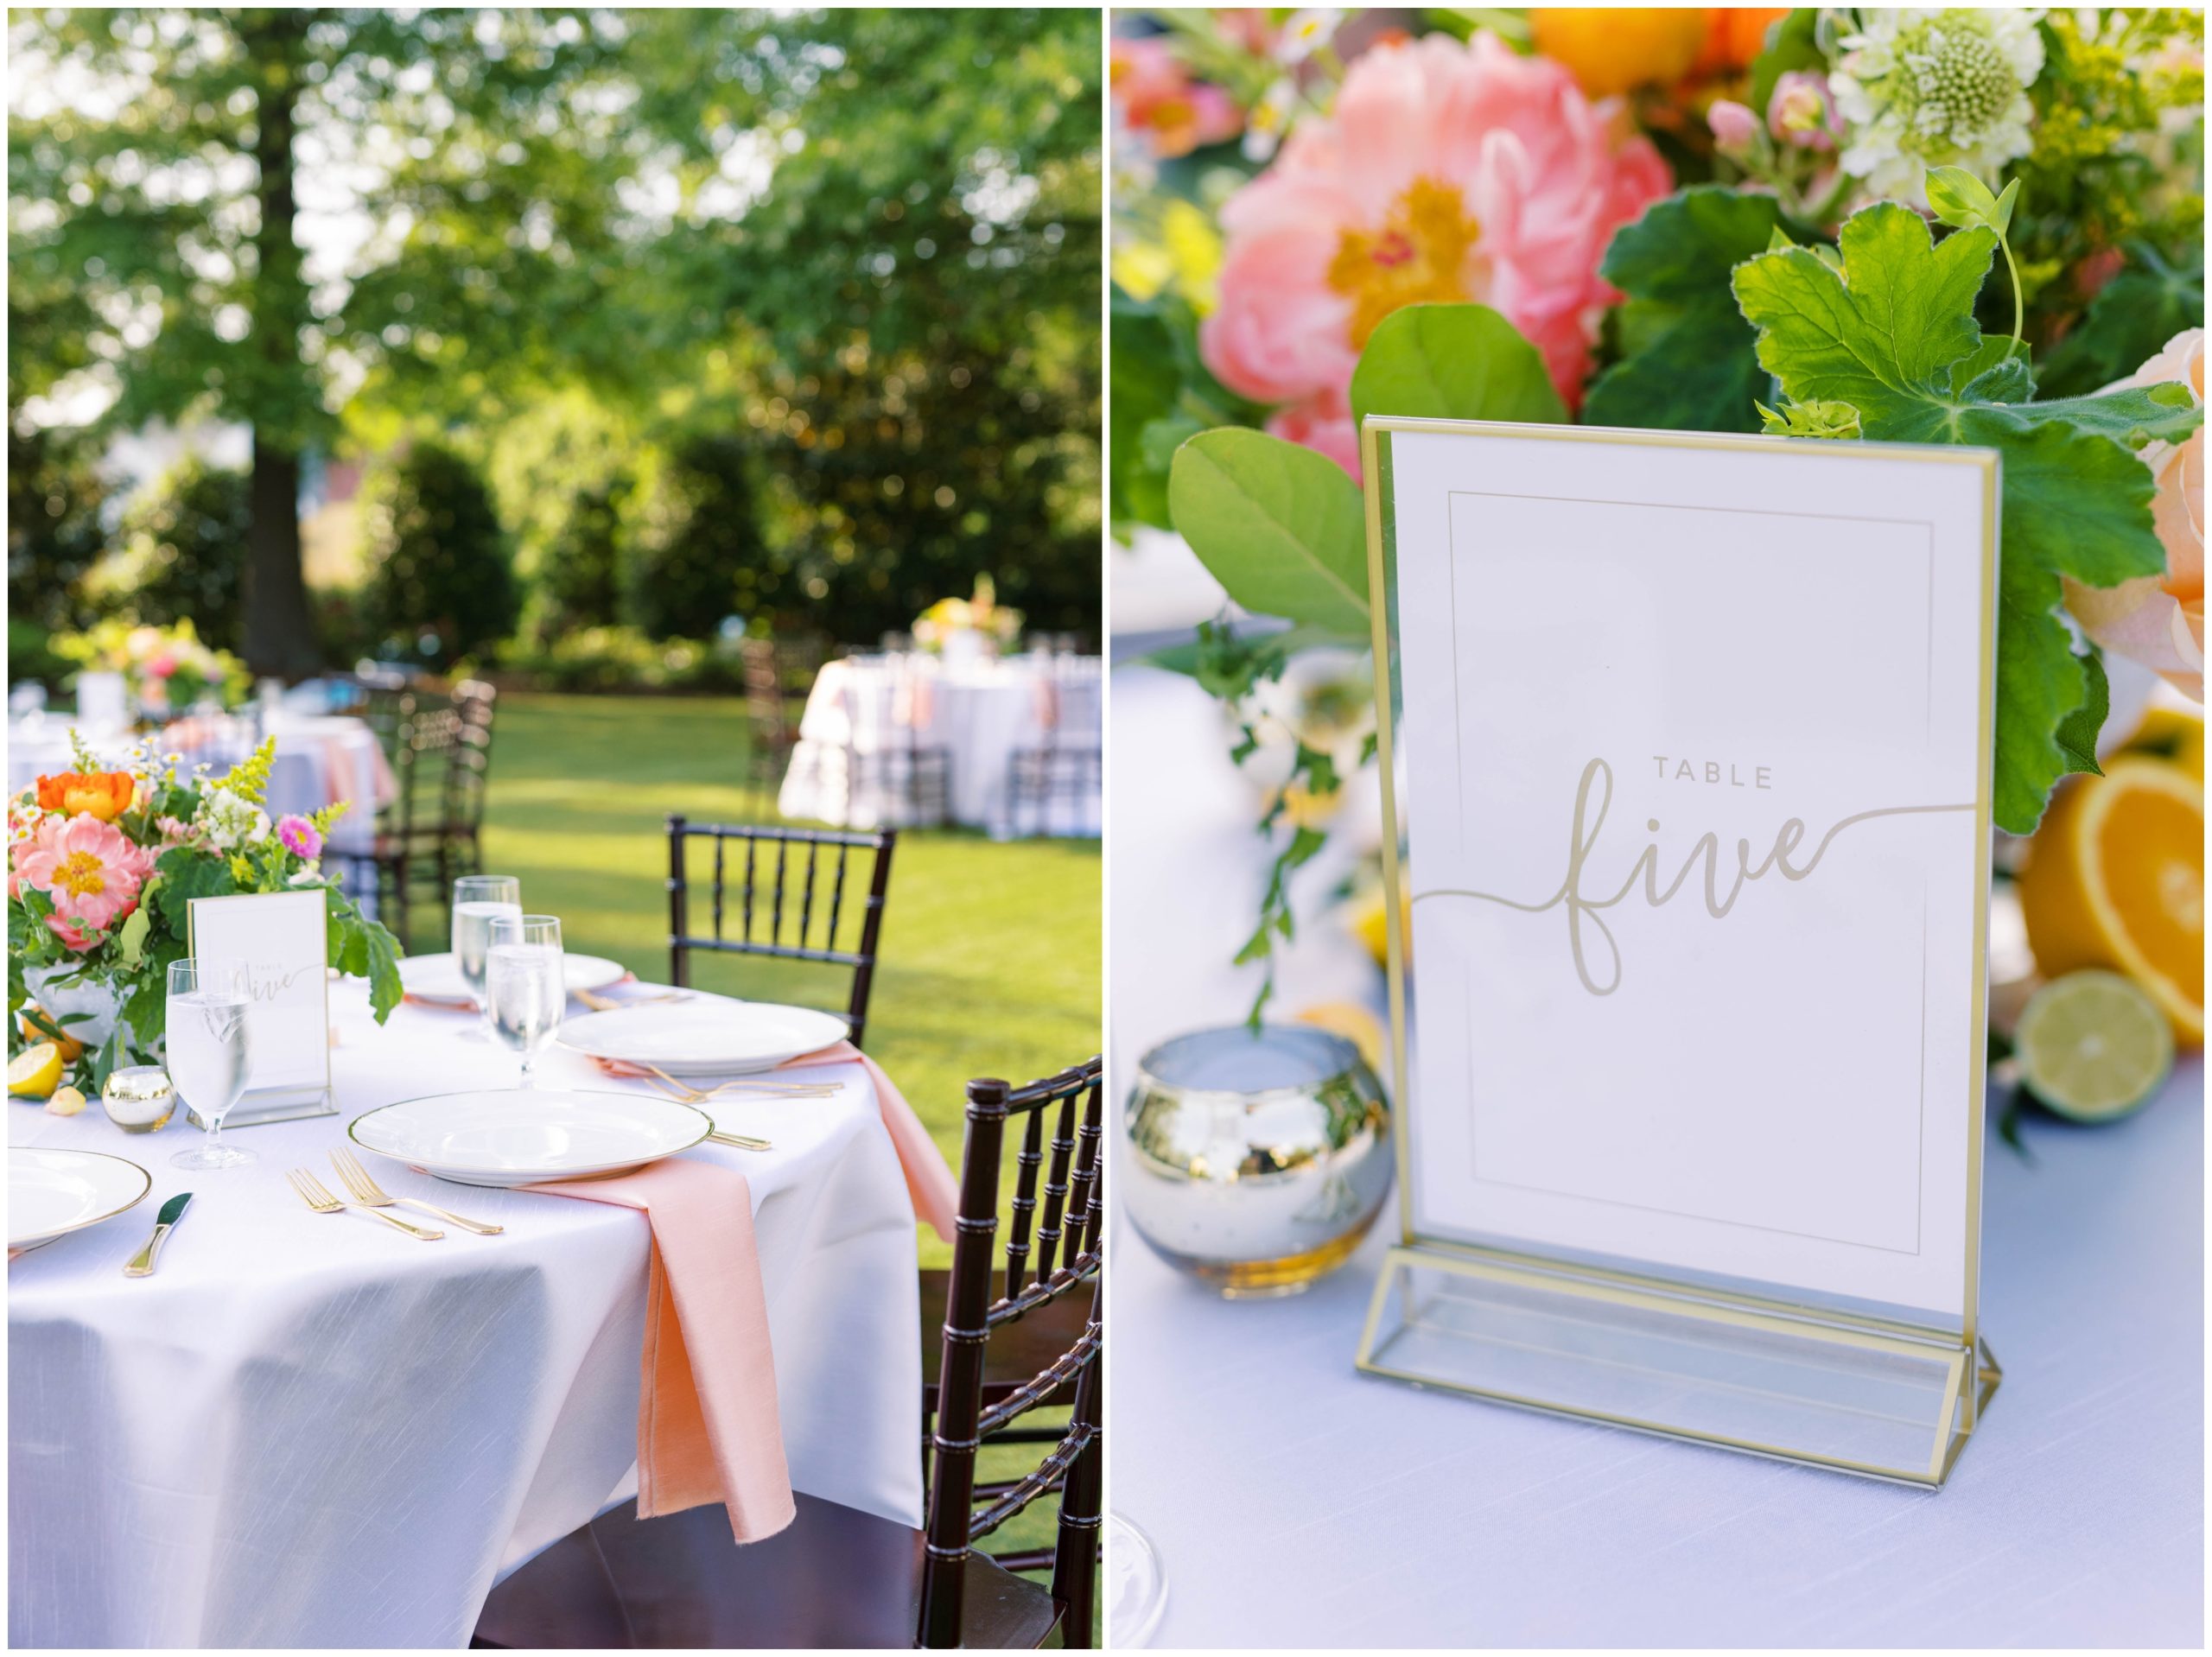 Pink satin linens, gold cutlery, and citrus fruits for a spring reception tablescape